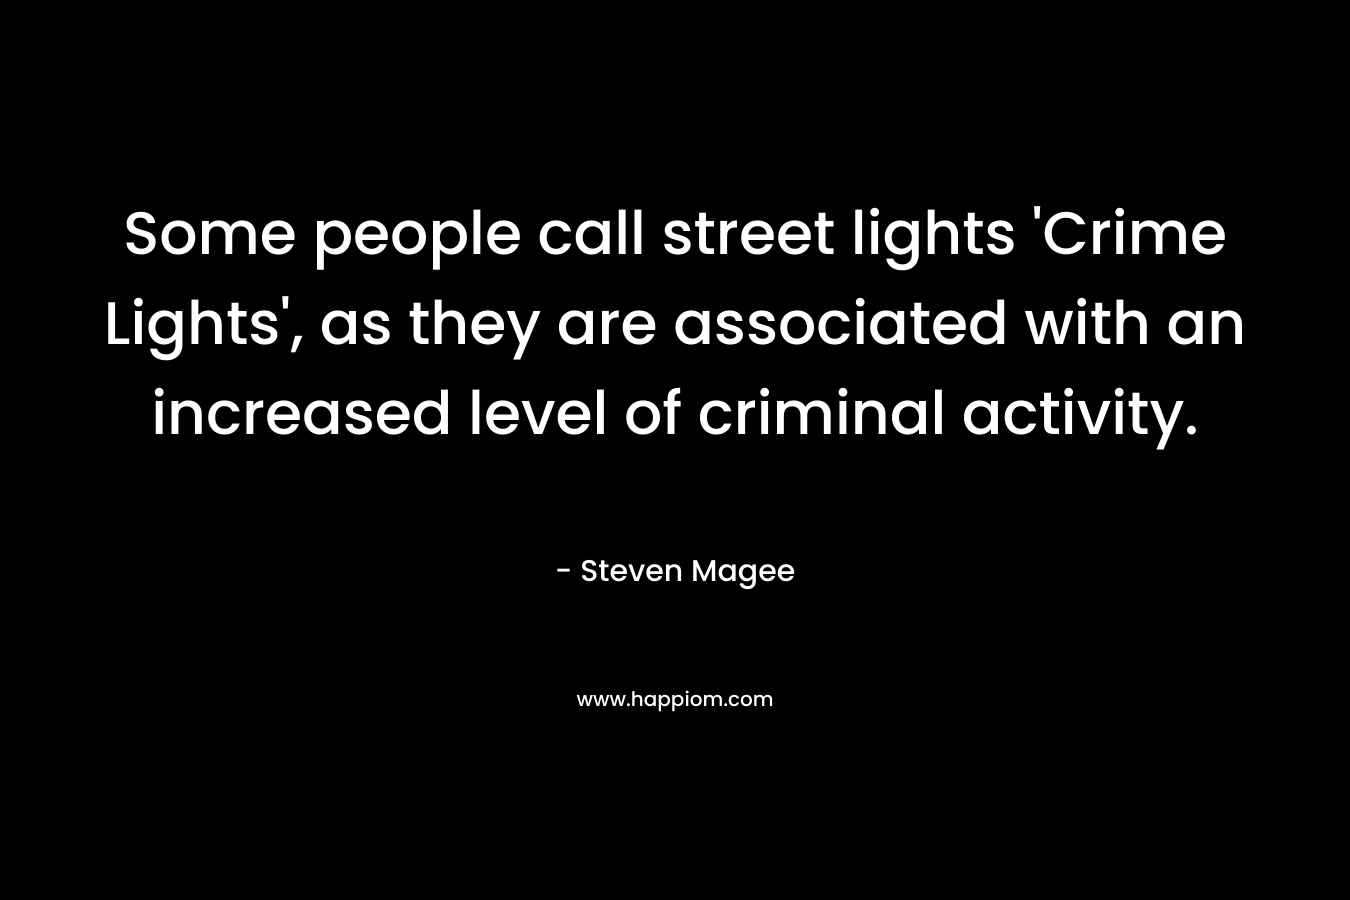 Some people call street lights ‘Crime Lights’, as they are associated with an increased level of criminal activity. – Steven Magee